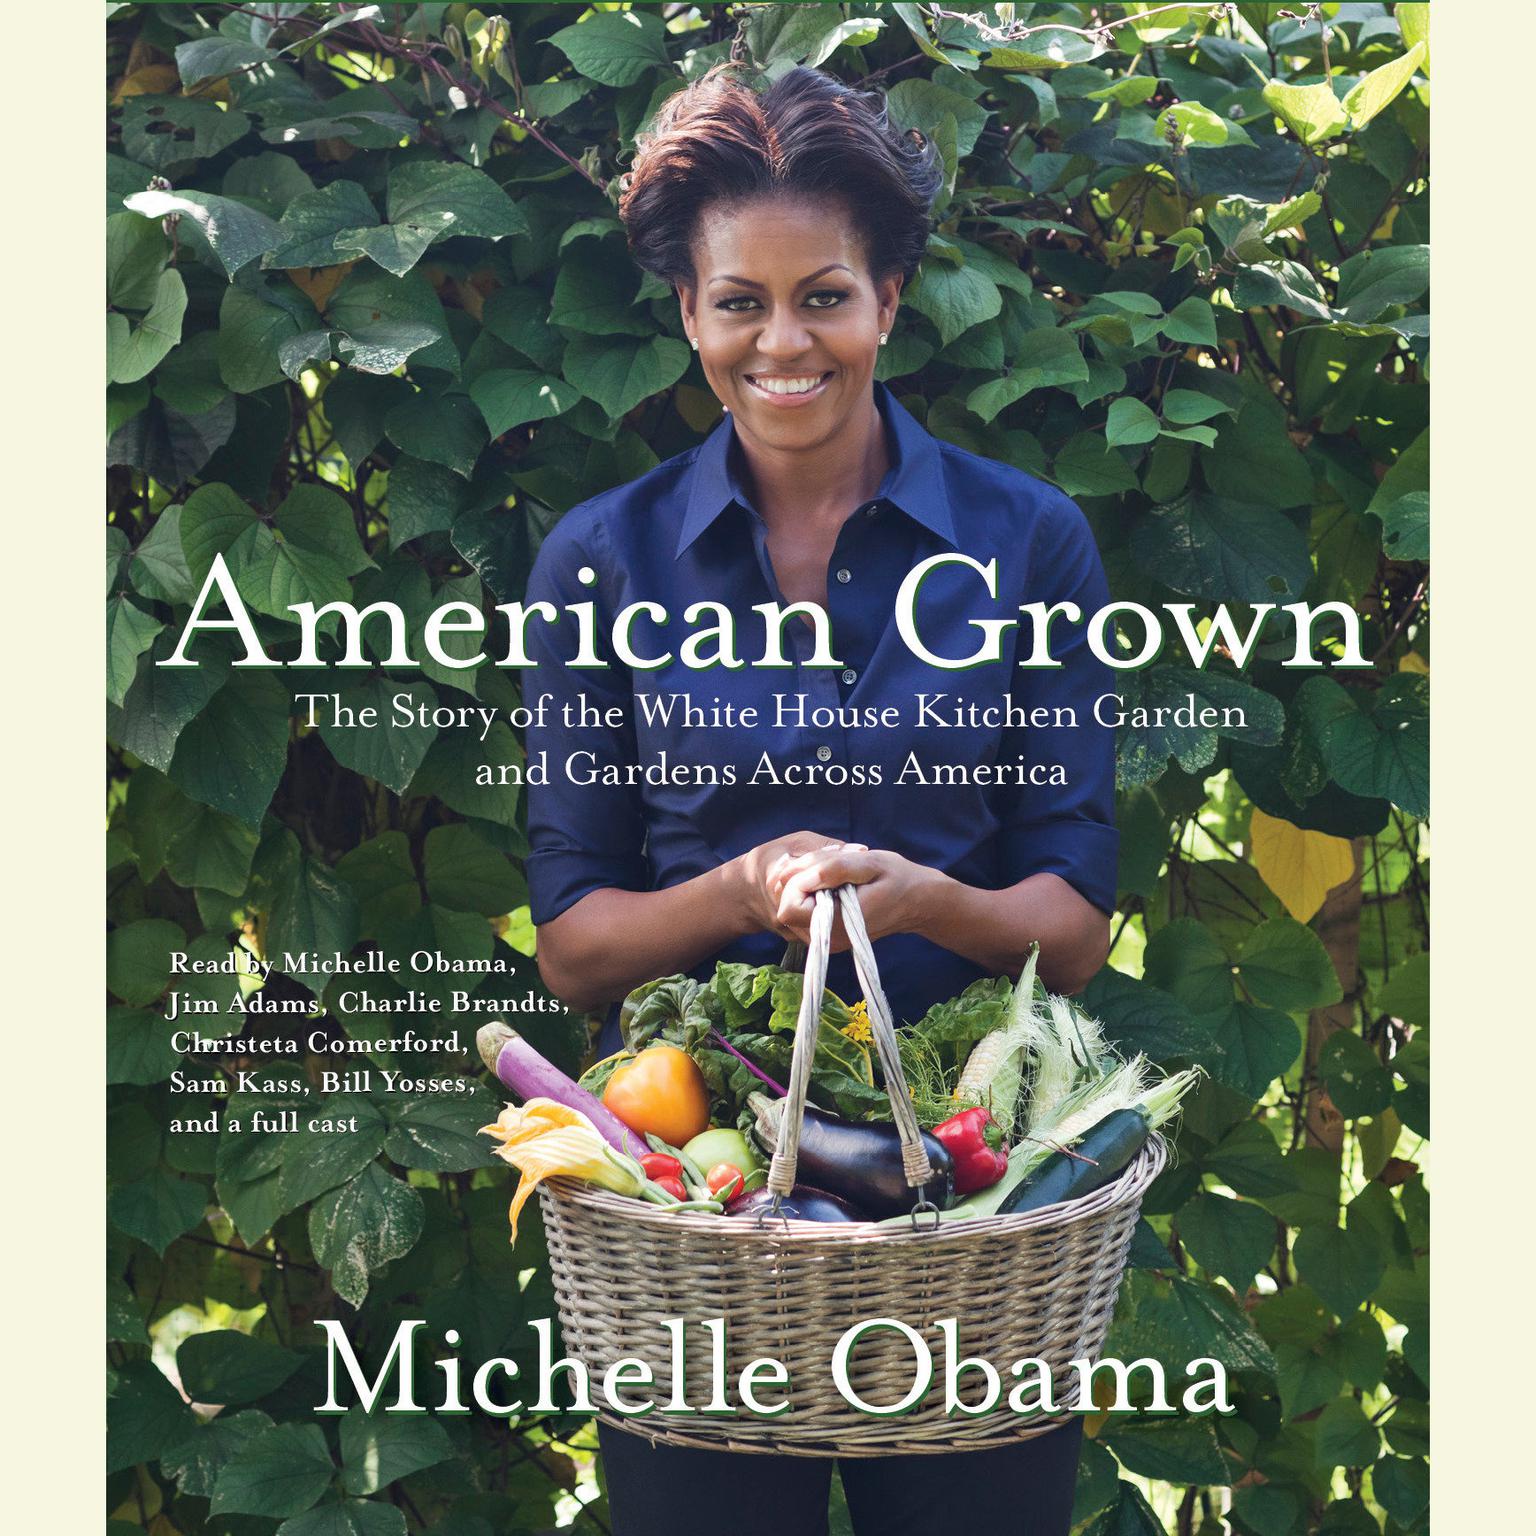 American Grown (Abridged): The Story of the White House Kitchen Garden and Gardens Across America Audiobook, by Michelle Obama